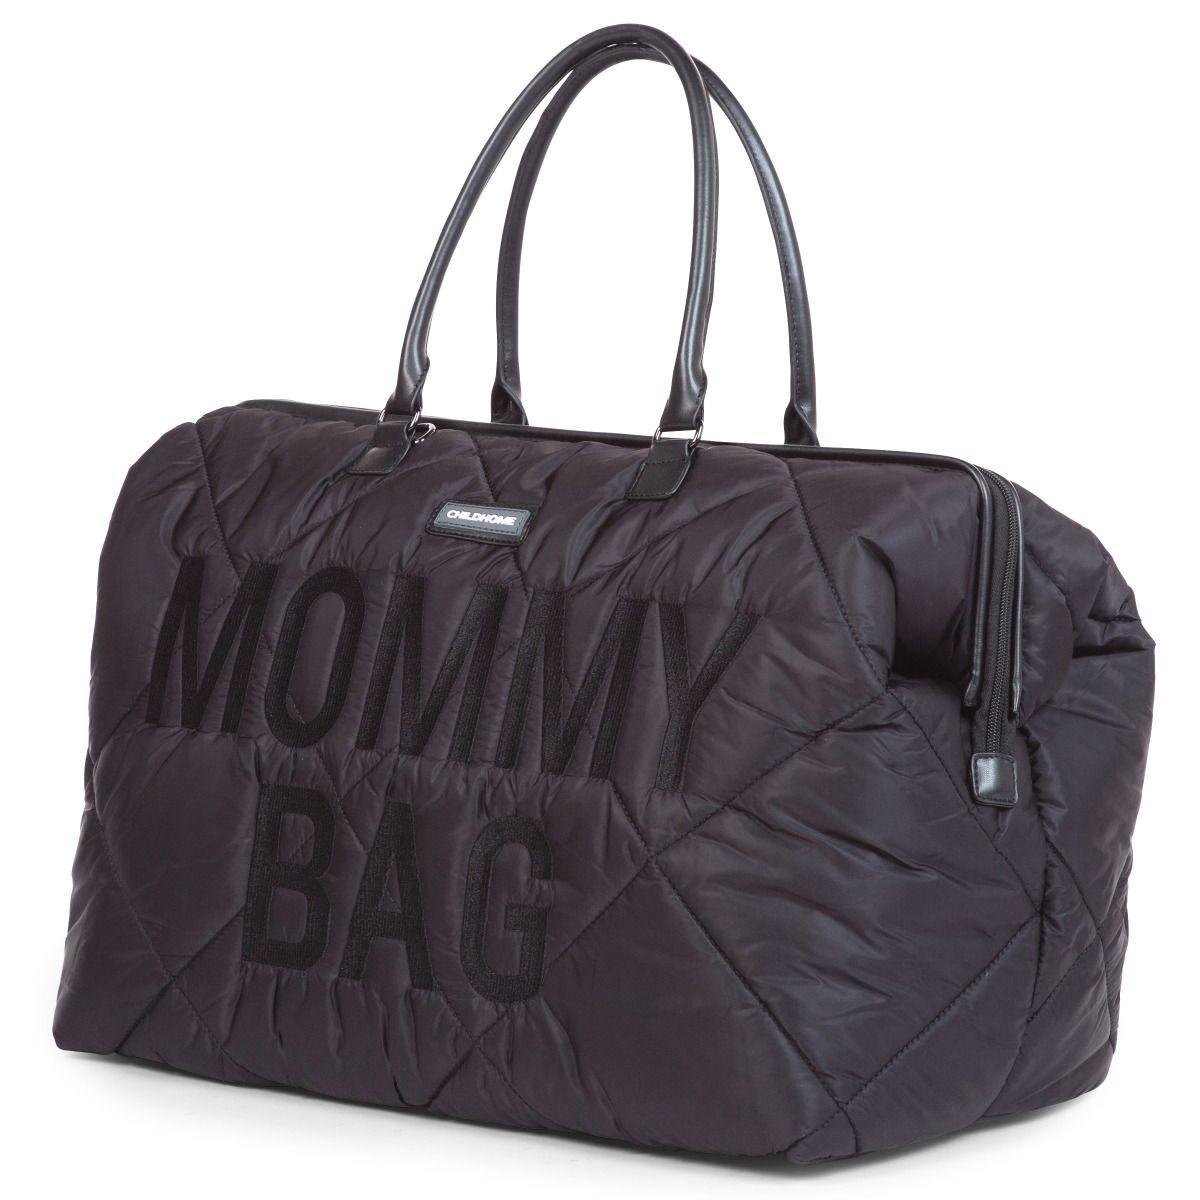 Childhome - Mommy bag puffered black